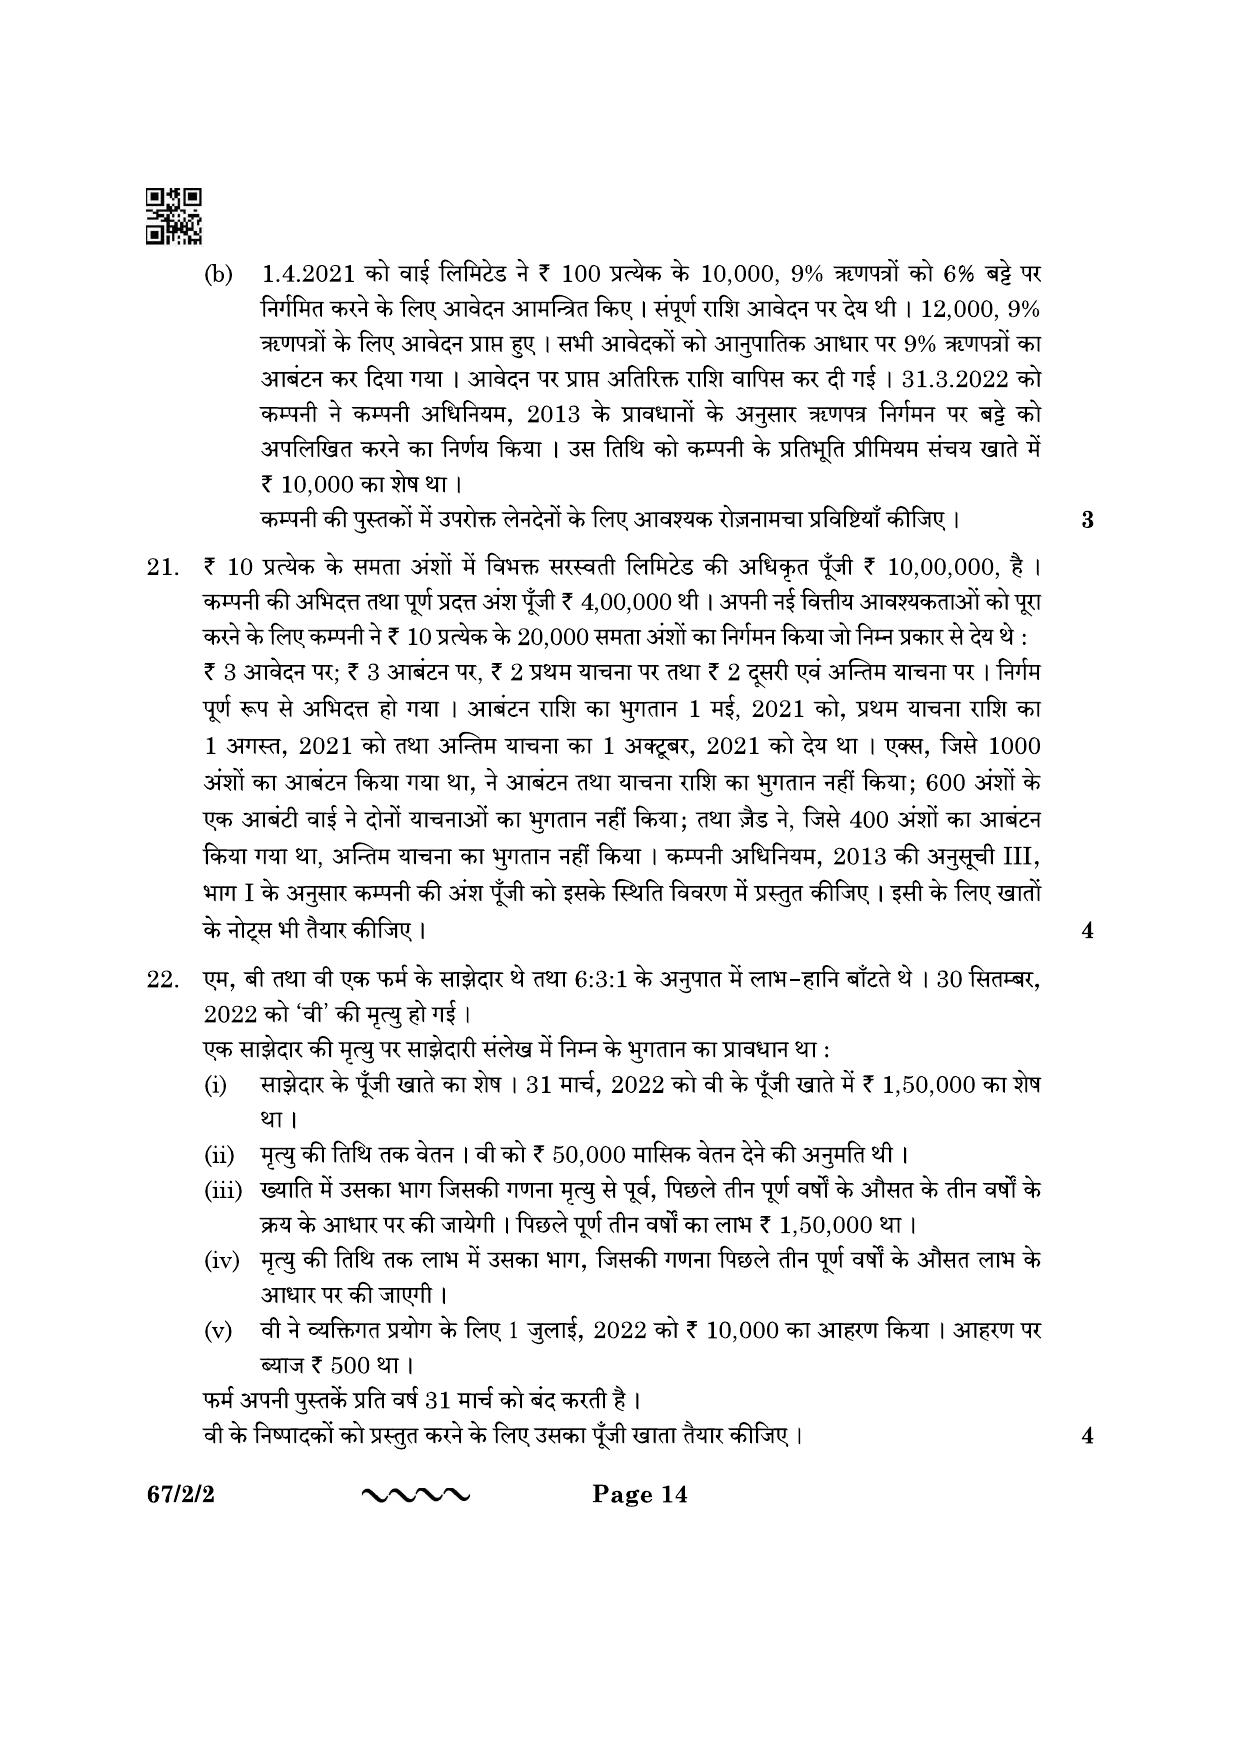 CBSE Class 12 67-2-2 Accountancy 2023 Question Paper - Page 14